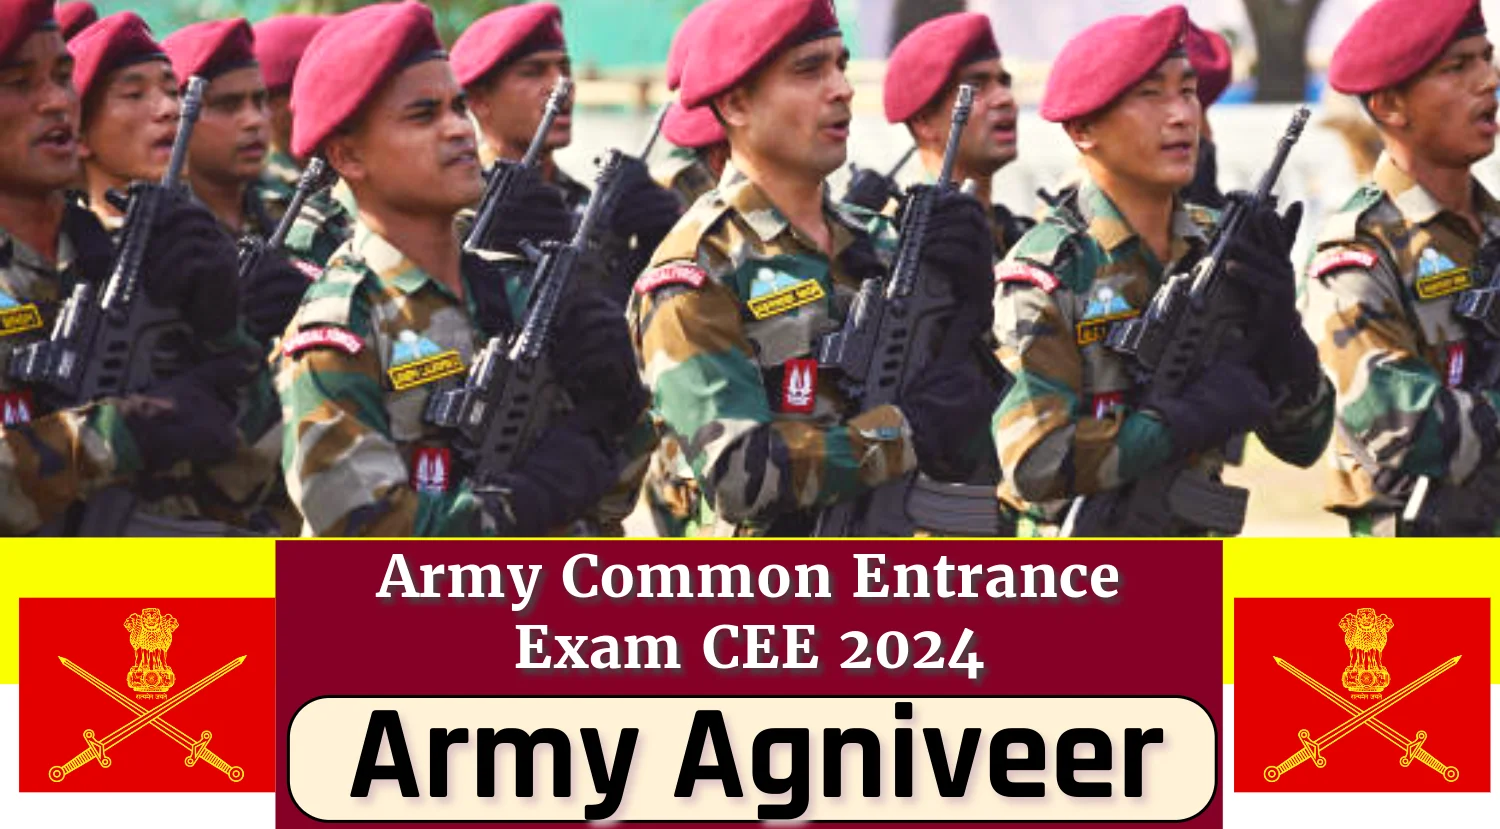 Army Agniveer Recruitment 2024 Application Begins, Check Army Common Entrance Exam CEE 2024 Vacancy Details Now